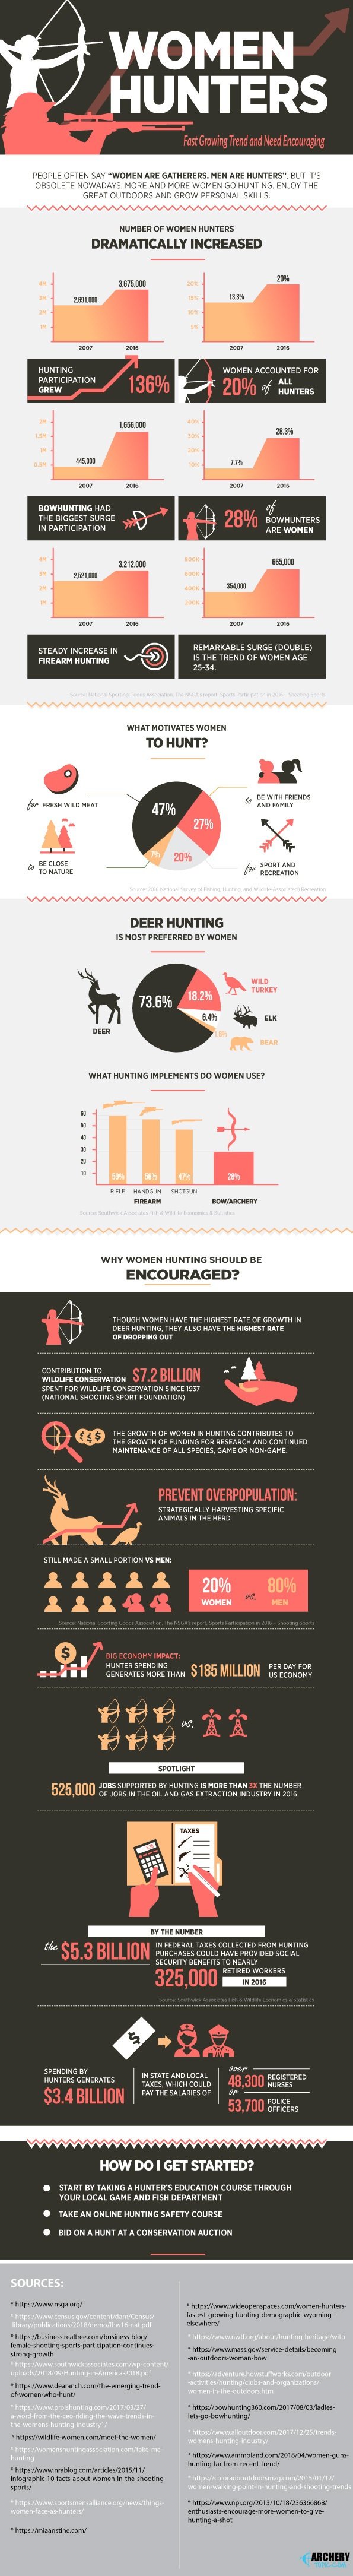 women hunting infographic - the fast growing trend and need encourage